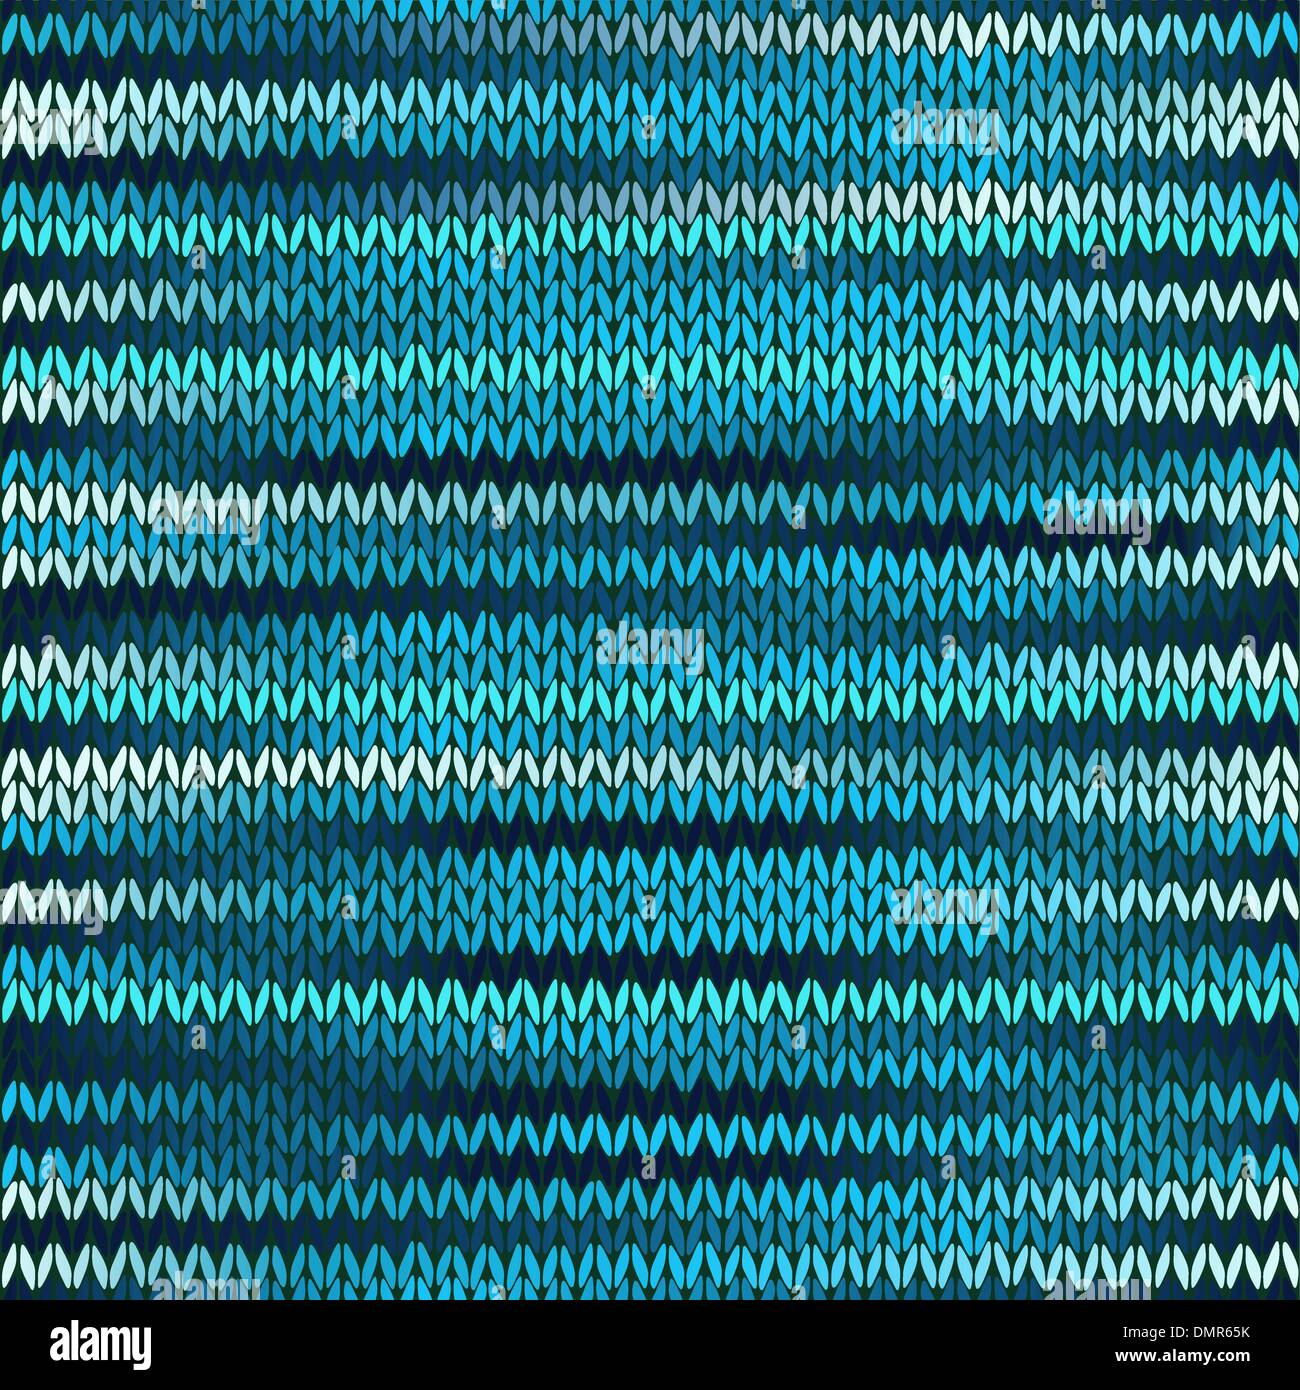 Style Seamless Knitted Melange Pattern. Blue Turquoise Black Whi Stock Vector